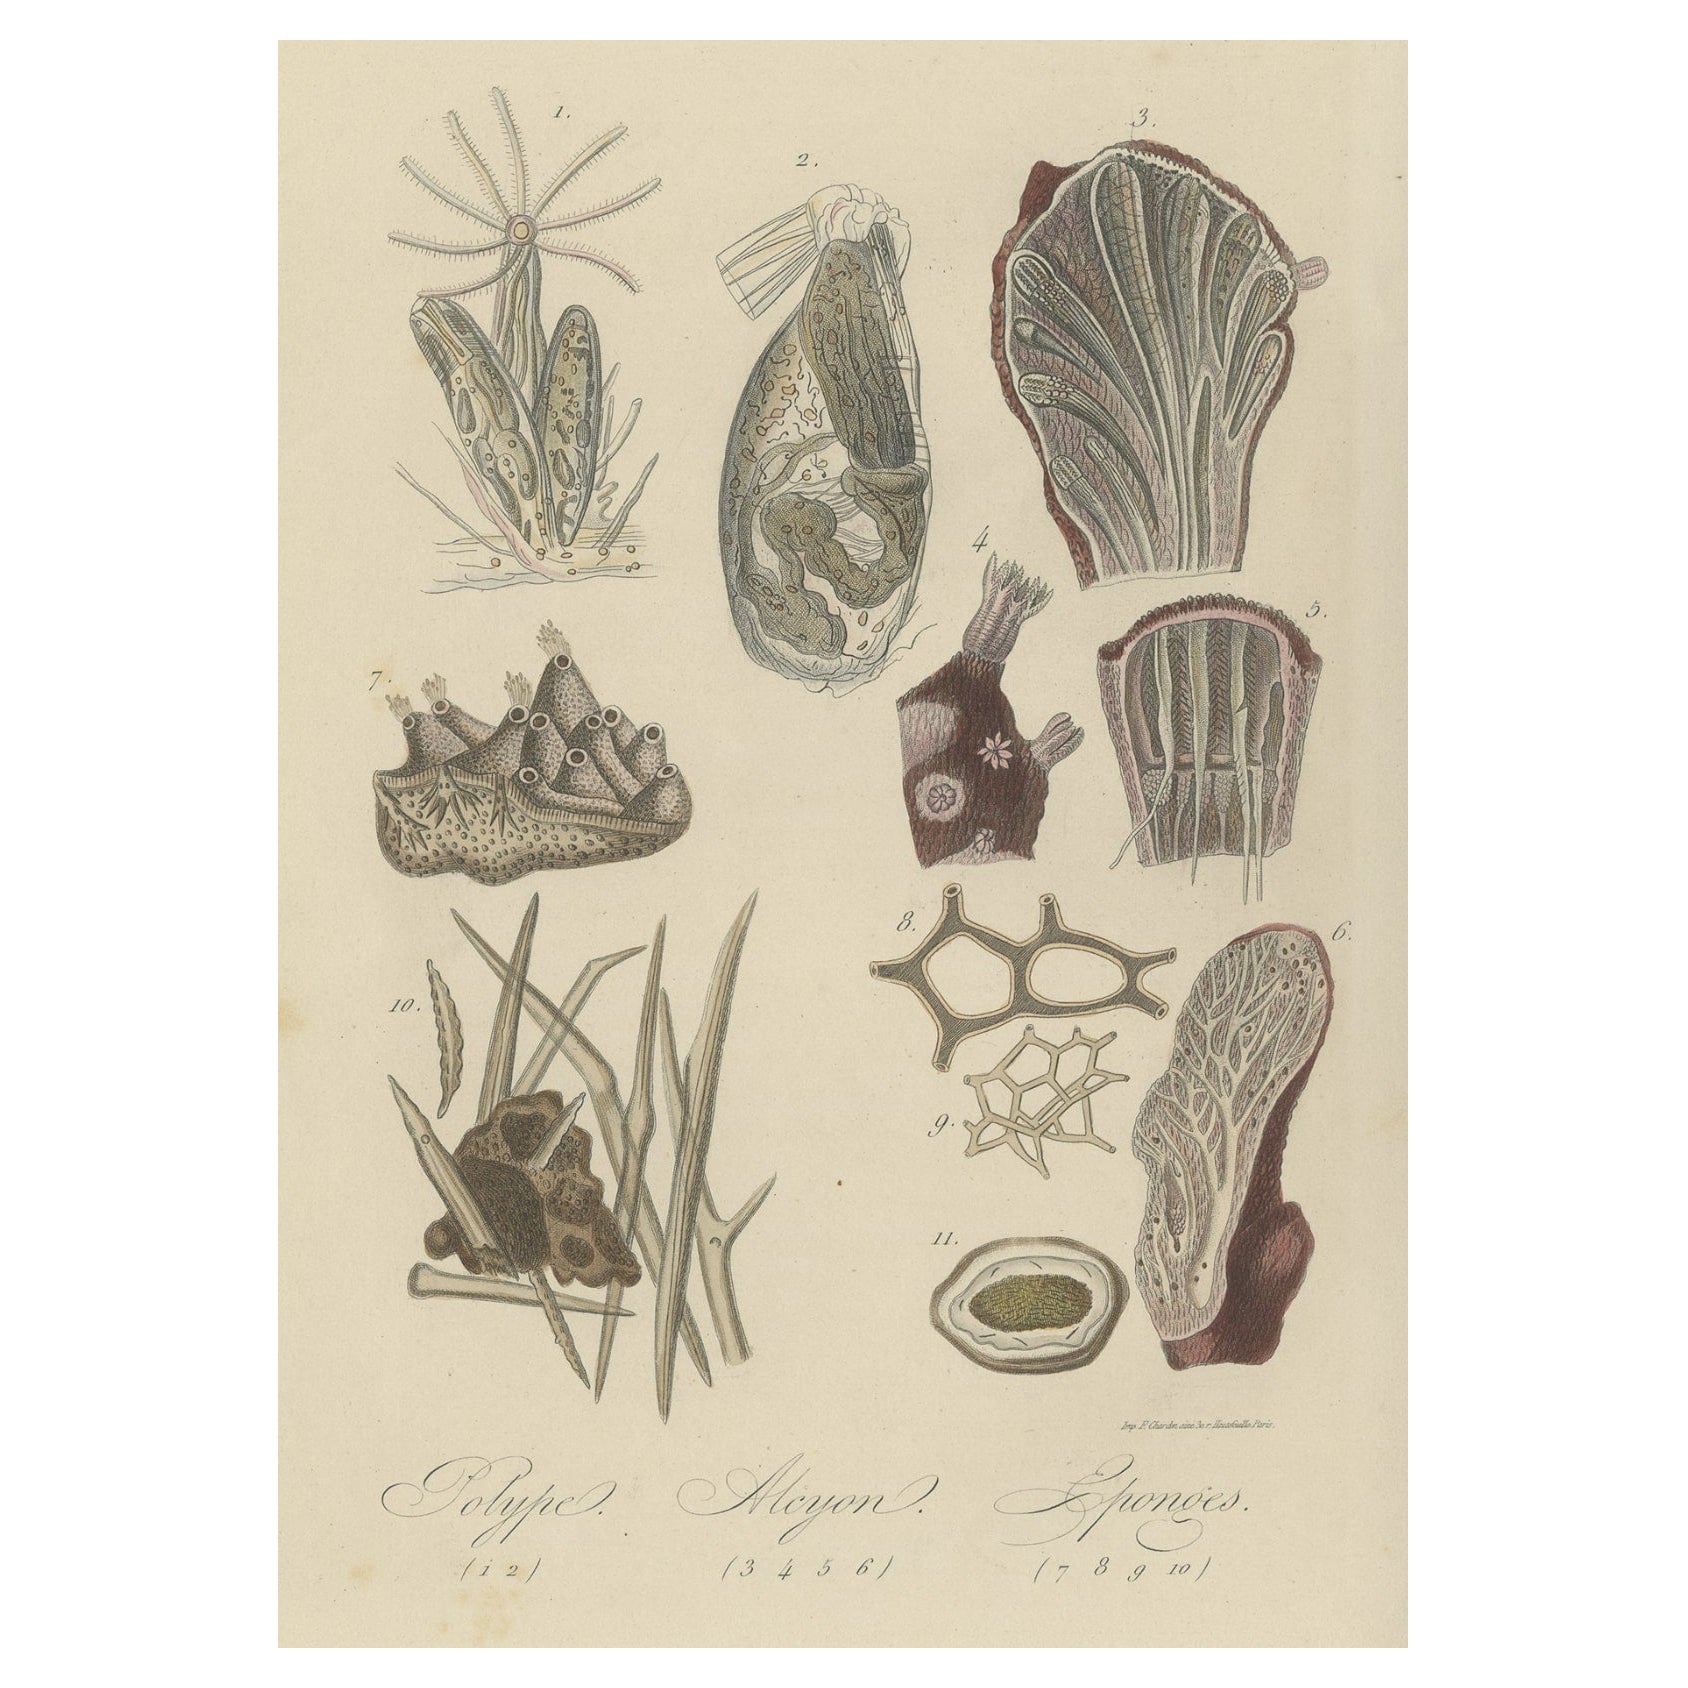 Decorative Antique Print of Various Sponges, Polypes and Other Sealife, 1854 For Sale